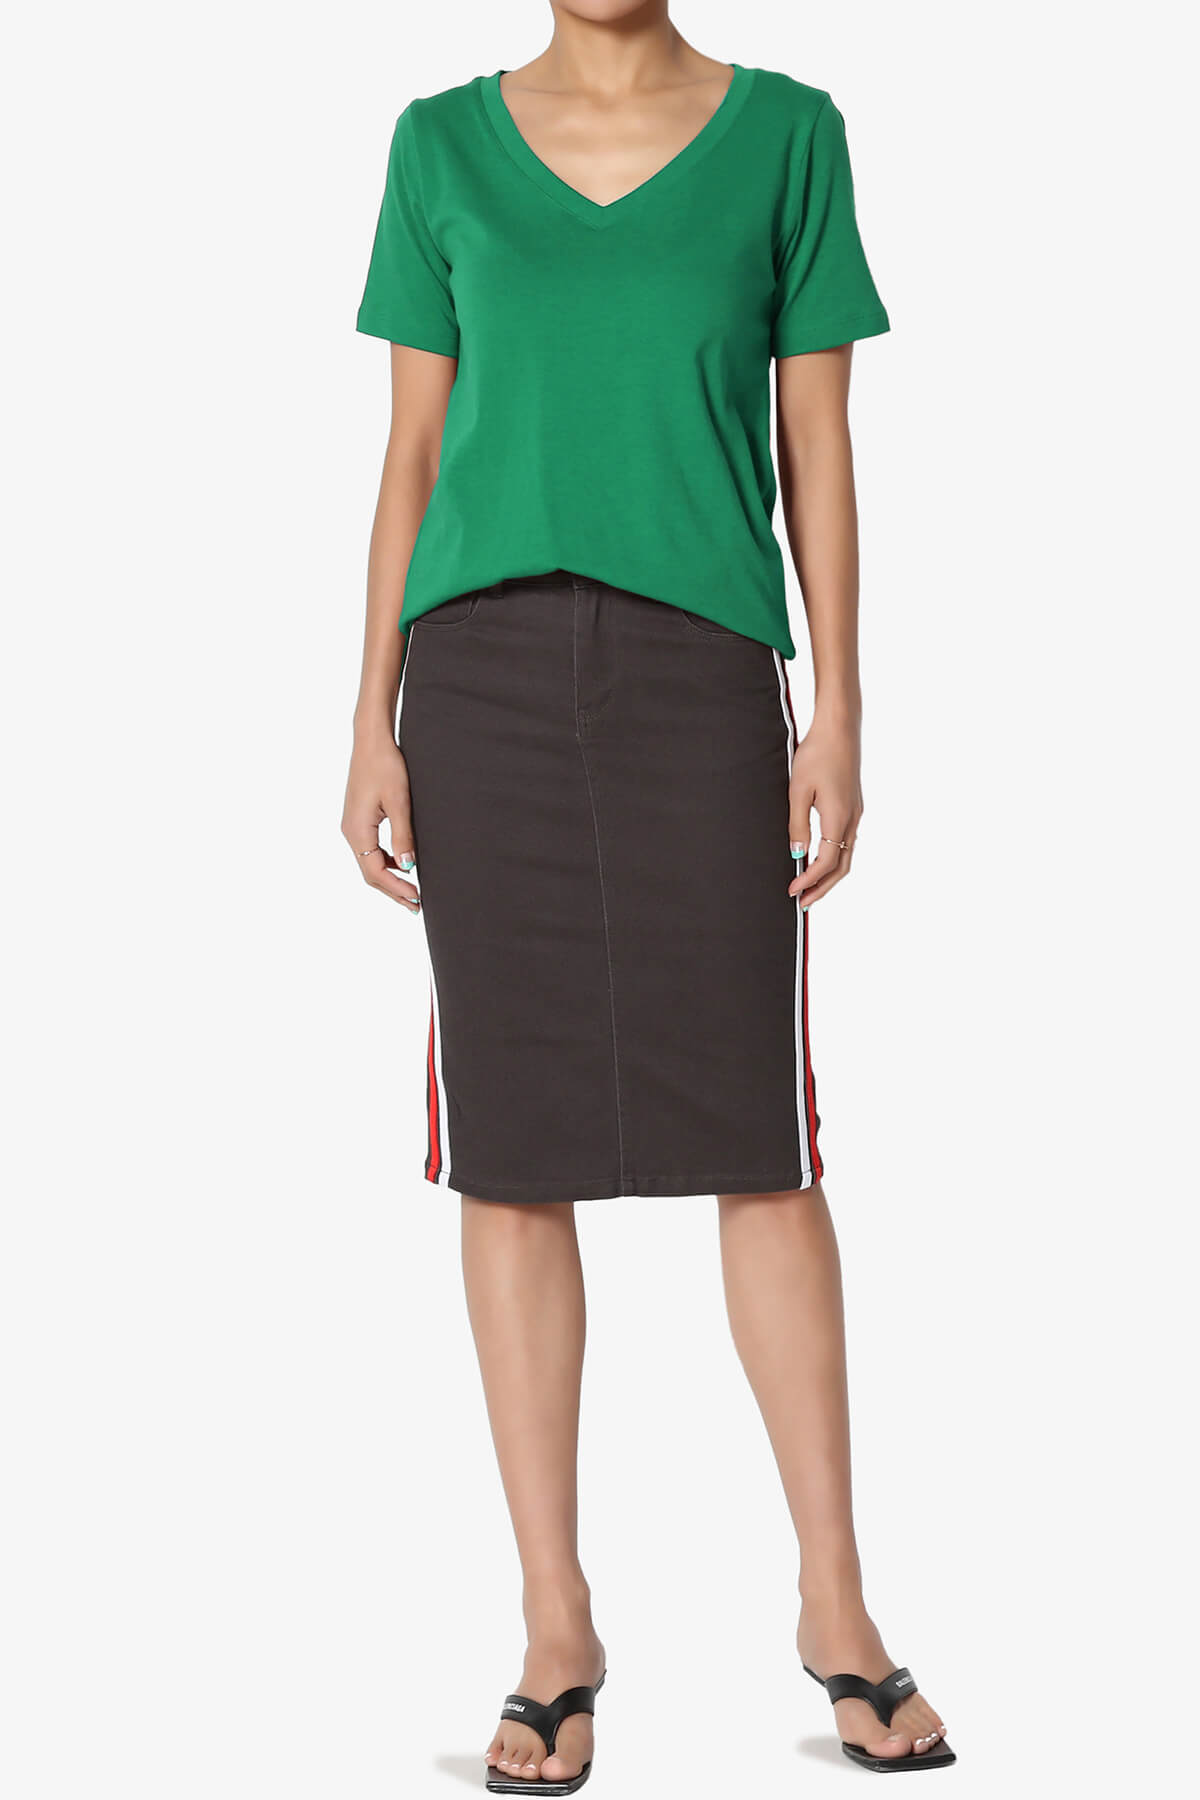 Load image into Gallery viewer, Elora V-Neck Short Sleeve T-Shirt KELLY GREEN_6
